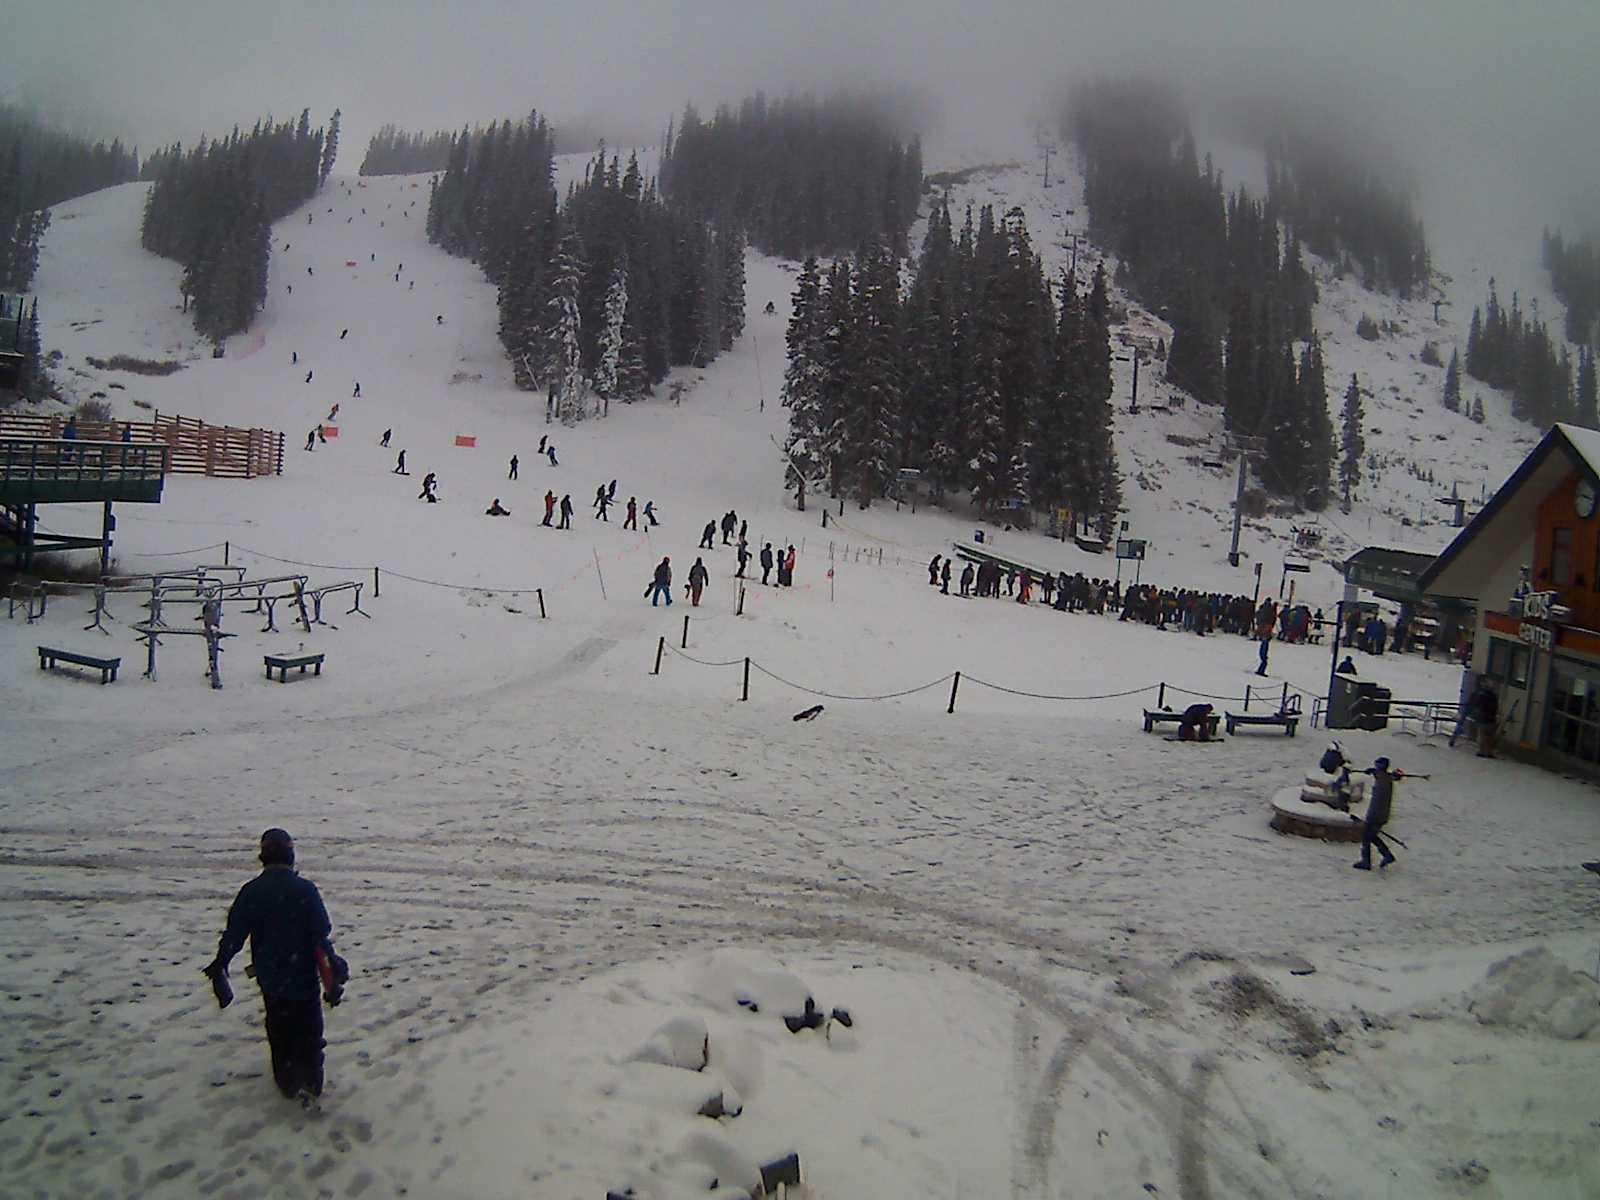 Arapahoe Basin, CO today at 9am.